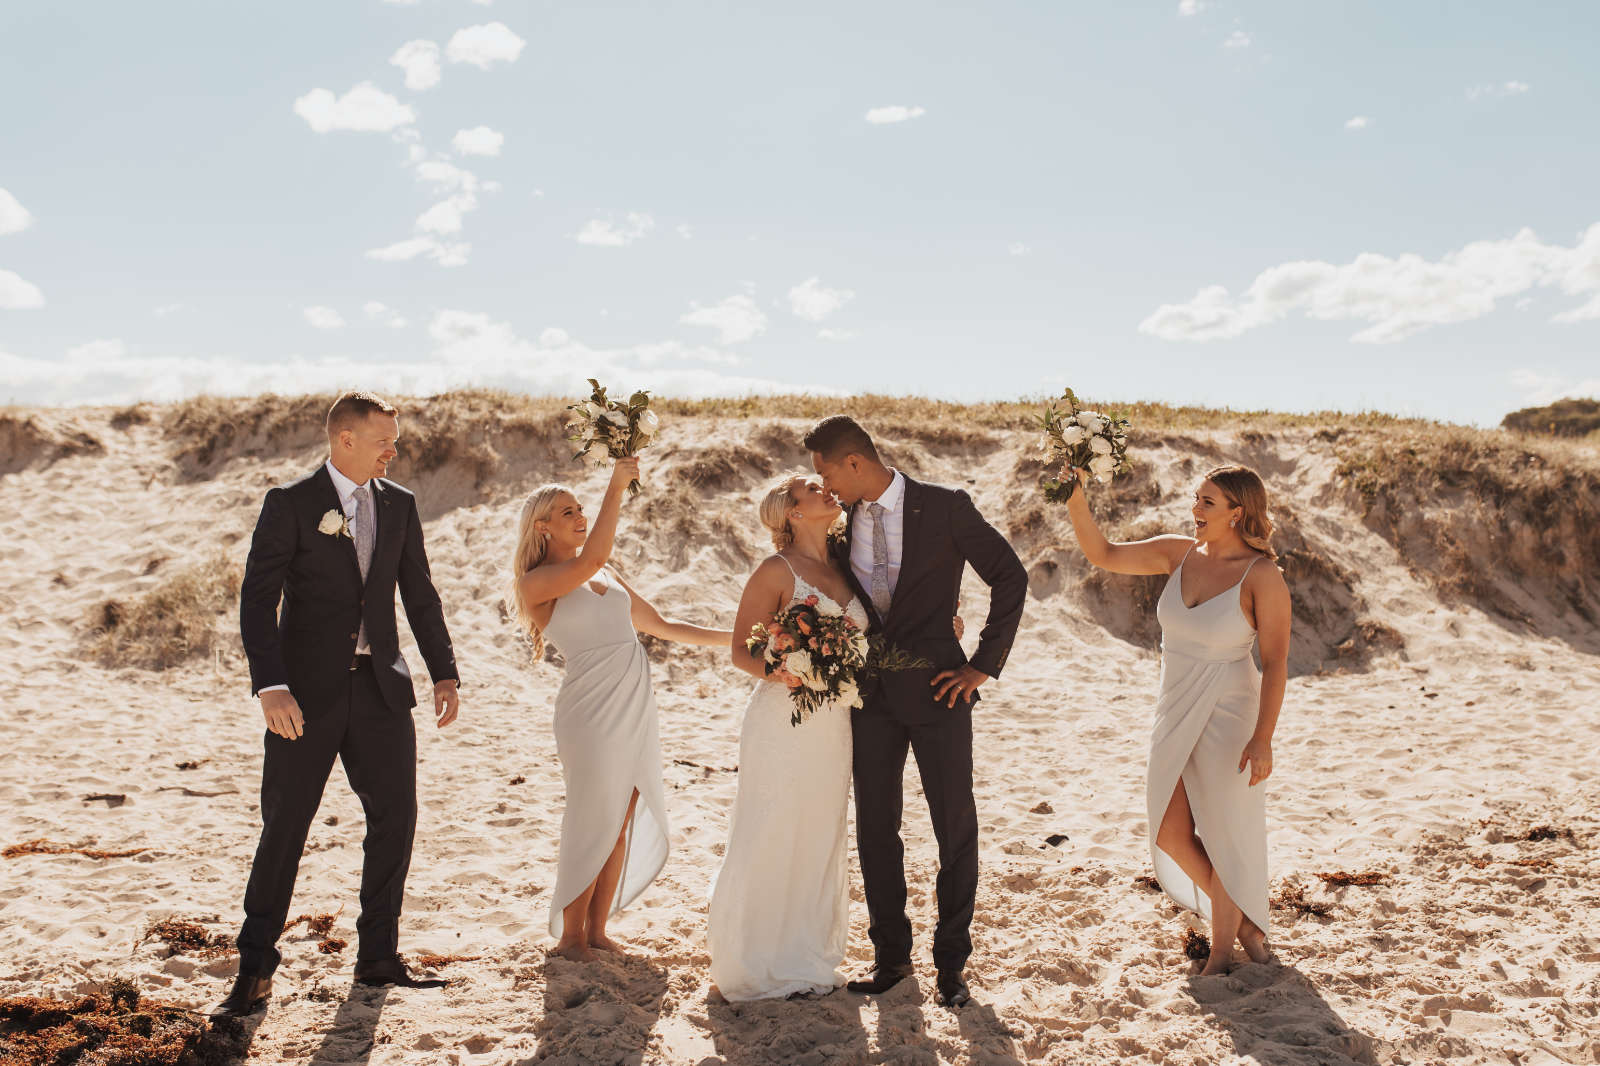 Luxe coastal wedding for Maddi and Dan at Caves Coastal Bar & Bungalows near Newcastle, NSW. Images by Tatiana Rose Photography.